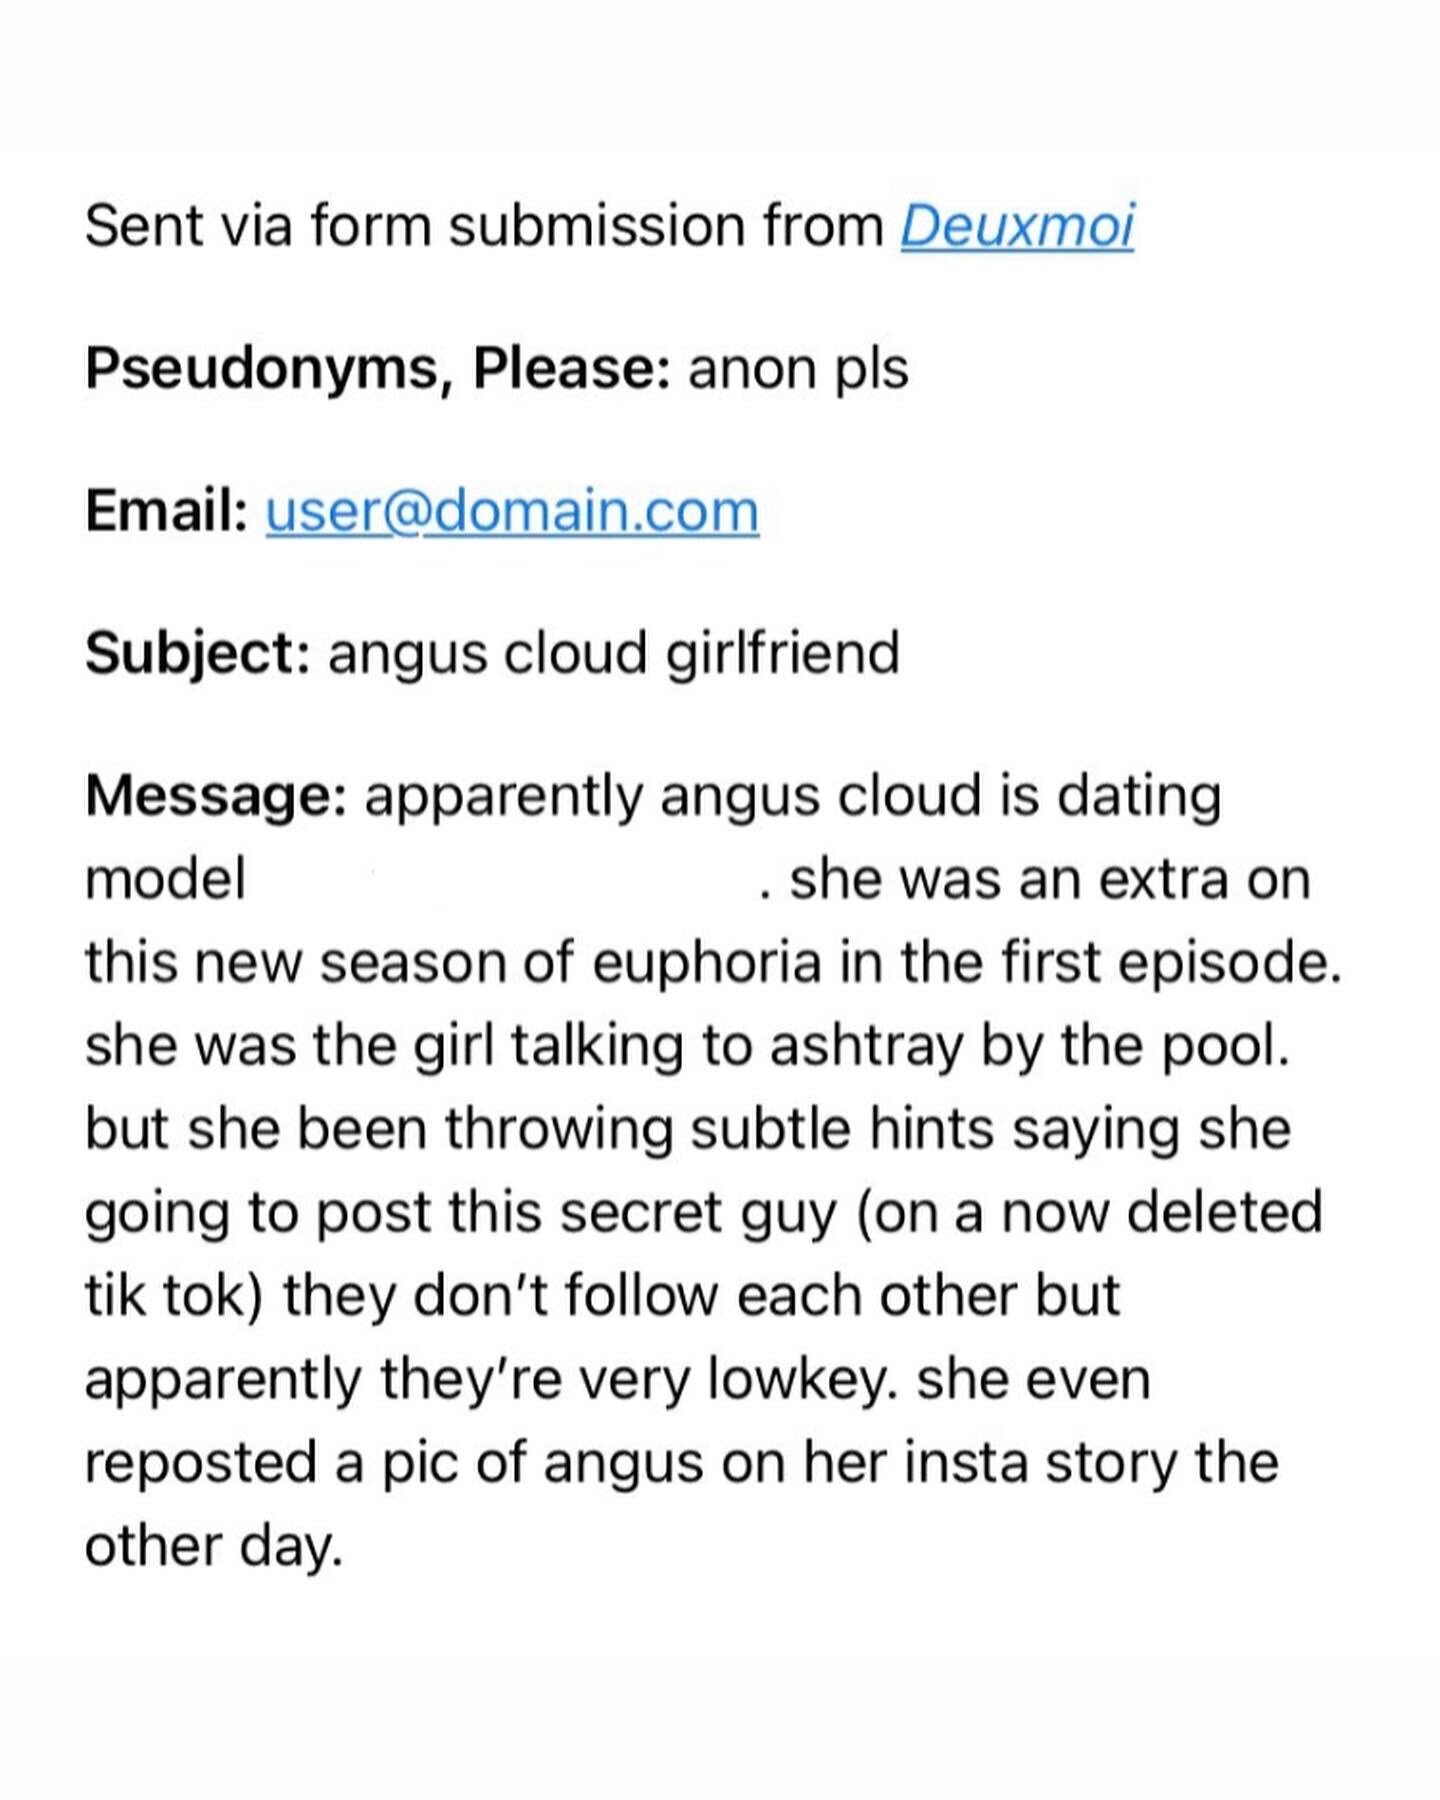 The anonymous Tip sent to Deuxmoi.